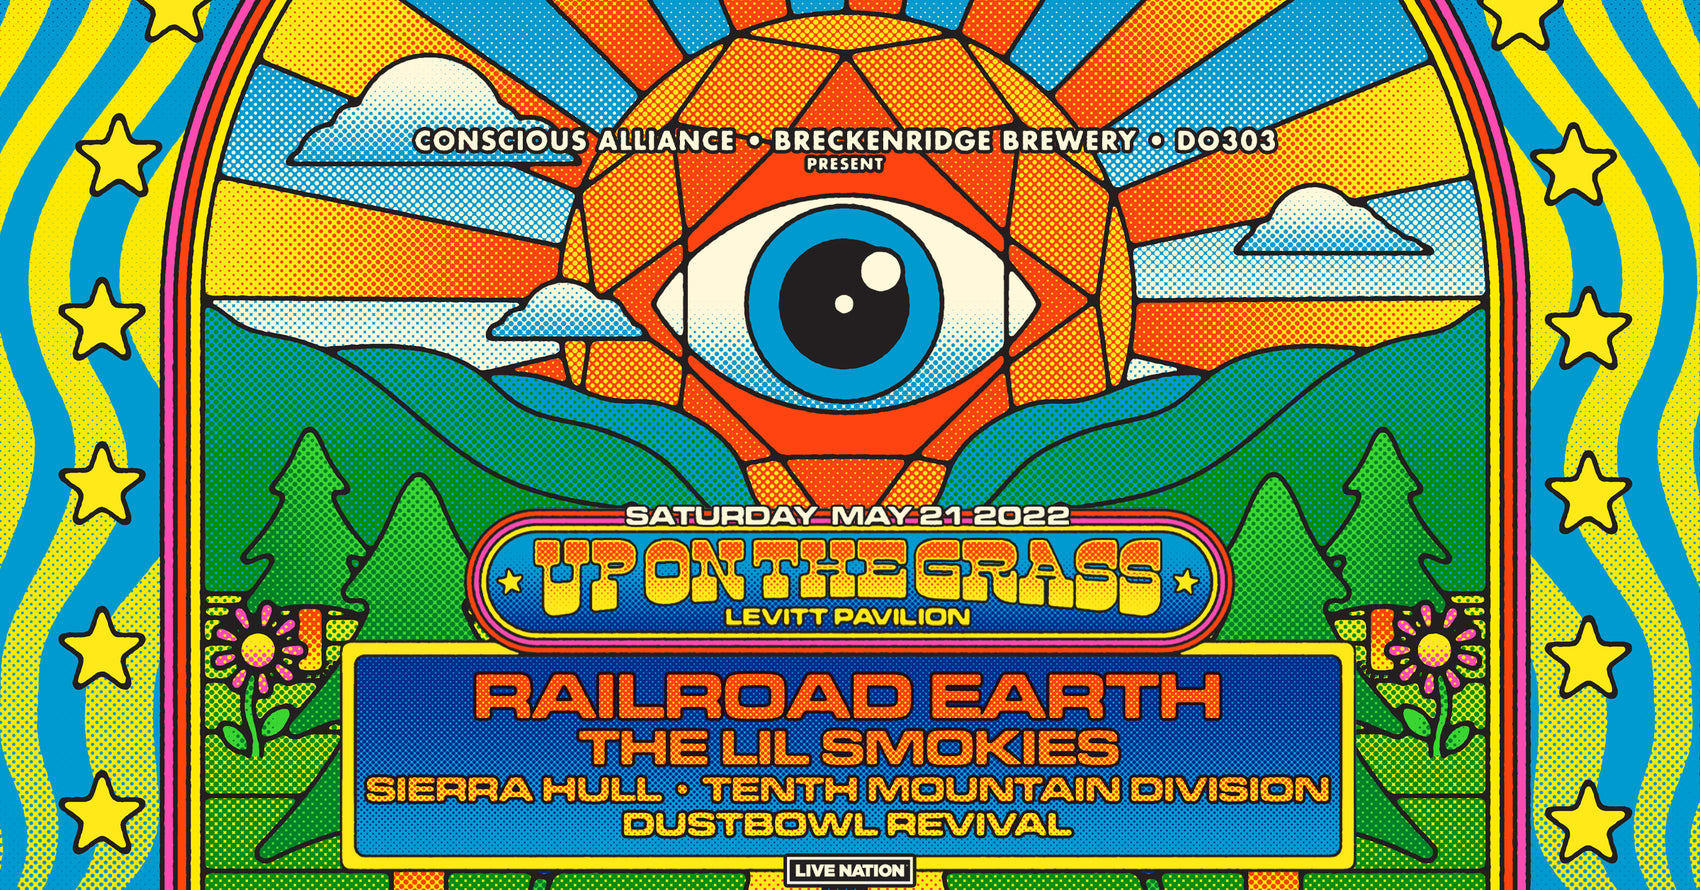 Conscious Alliance, Breckenridge Brewery & Do303 presents 'Up on the Grass'